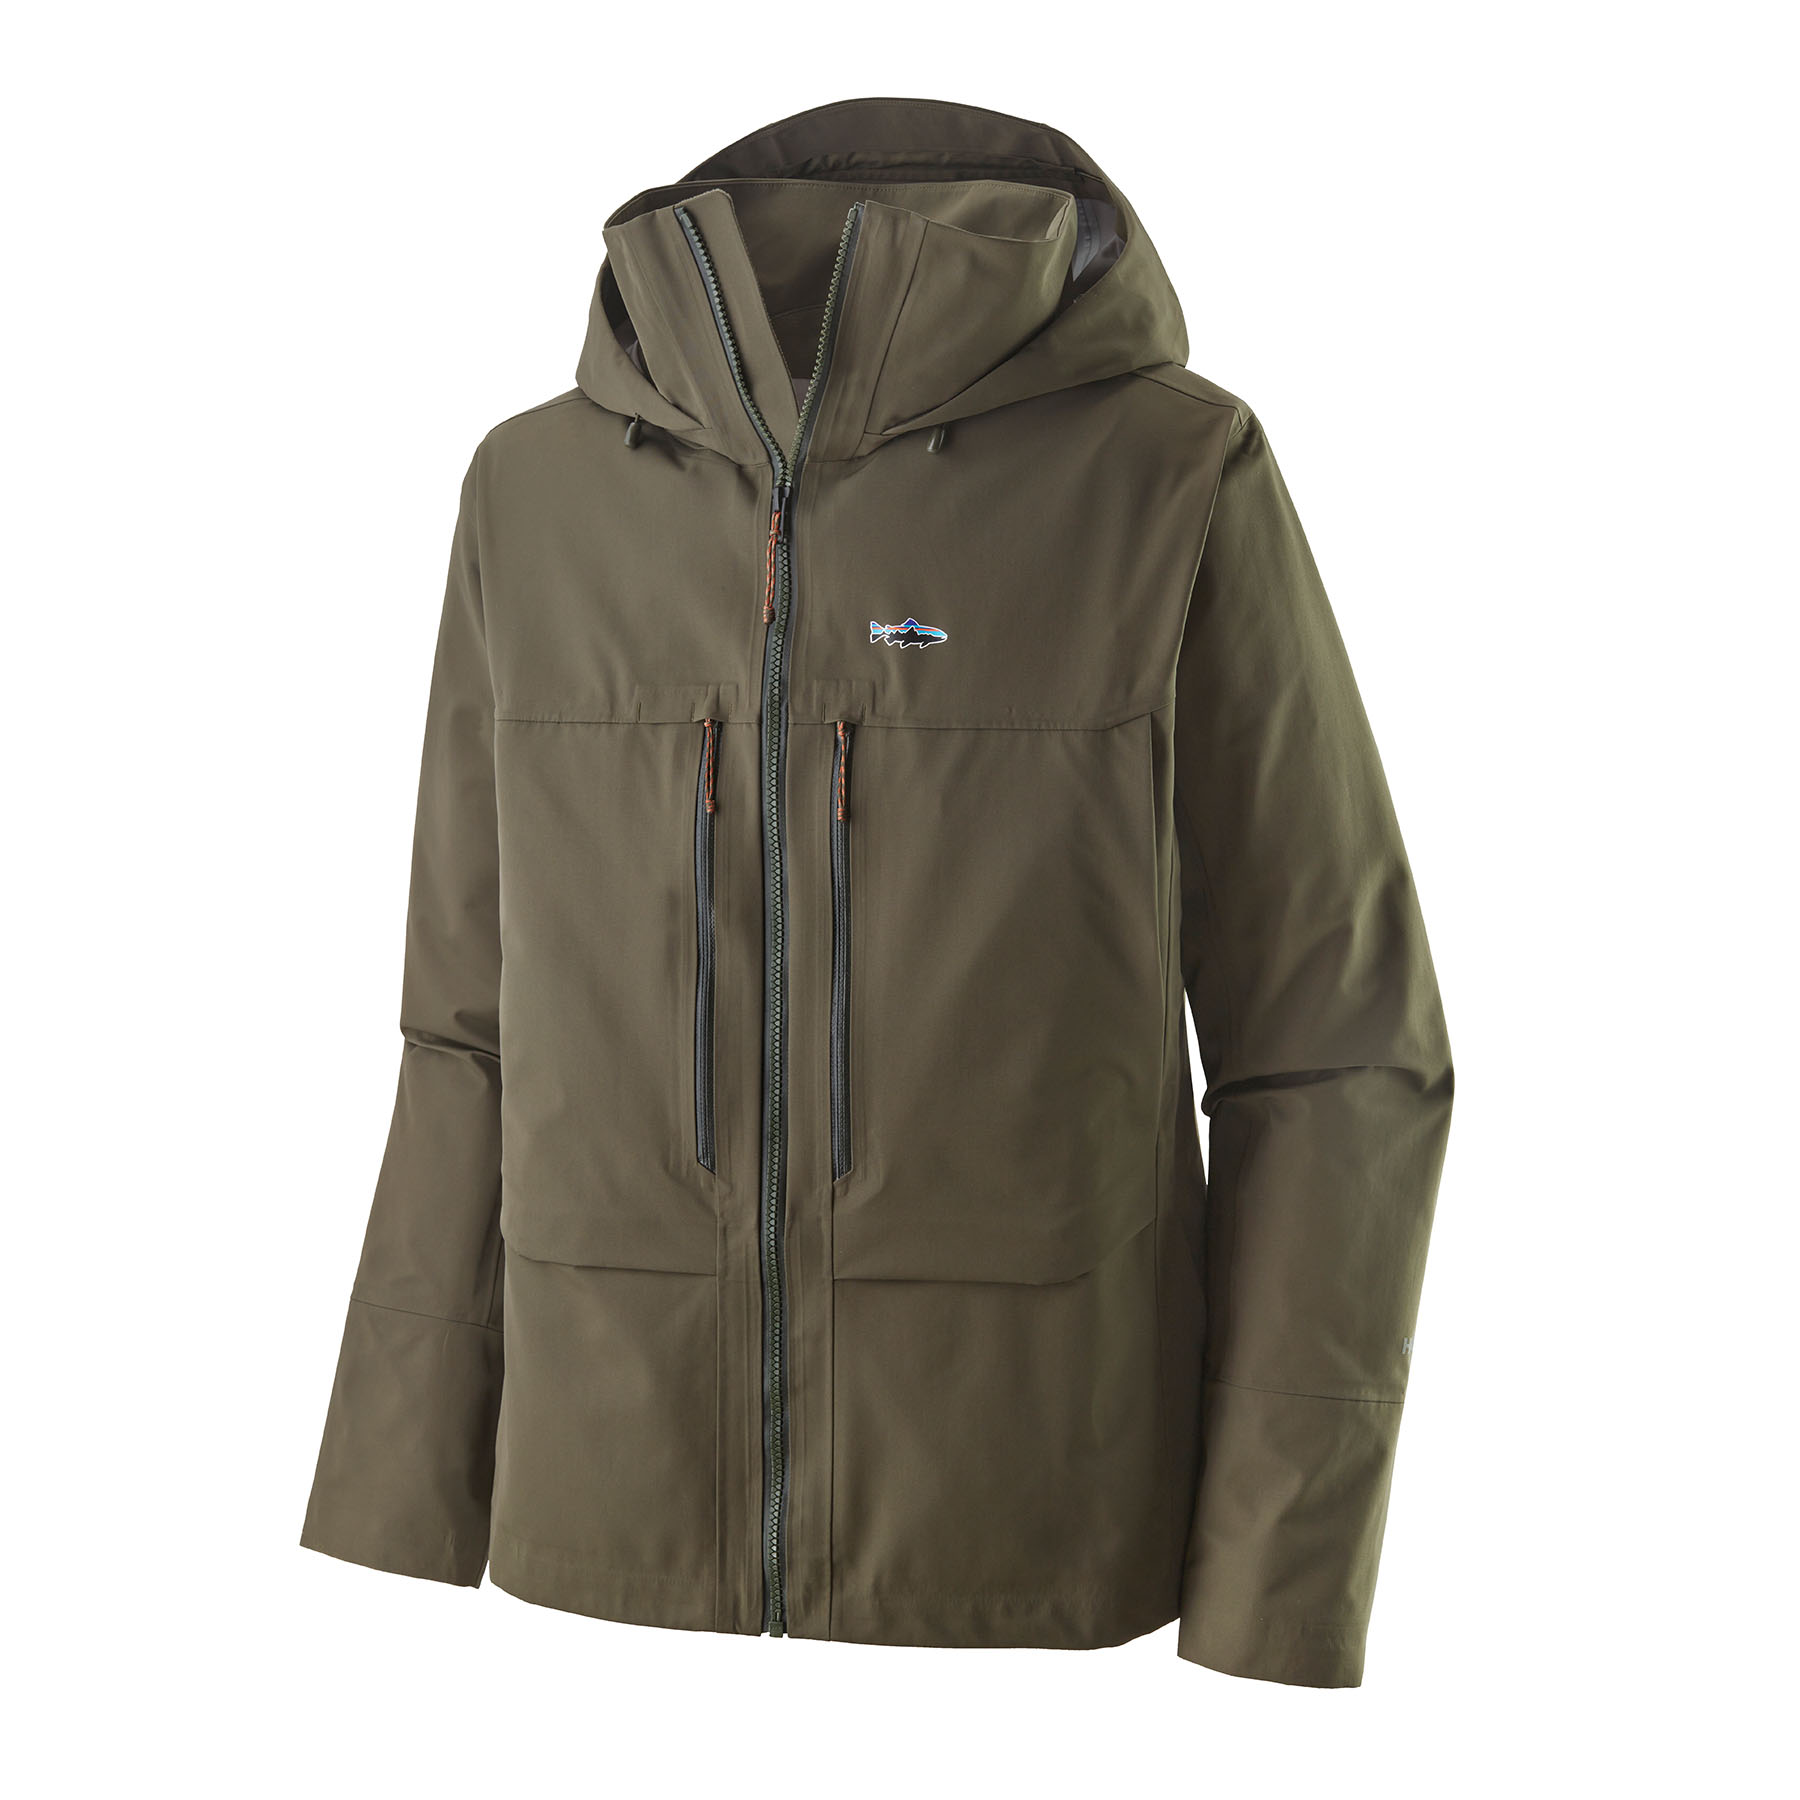 patagonia swiftcurrent jacket in tail fly fishing magazine